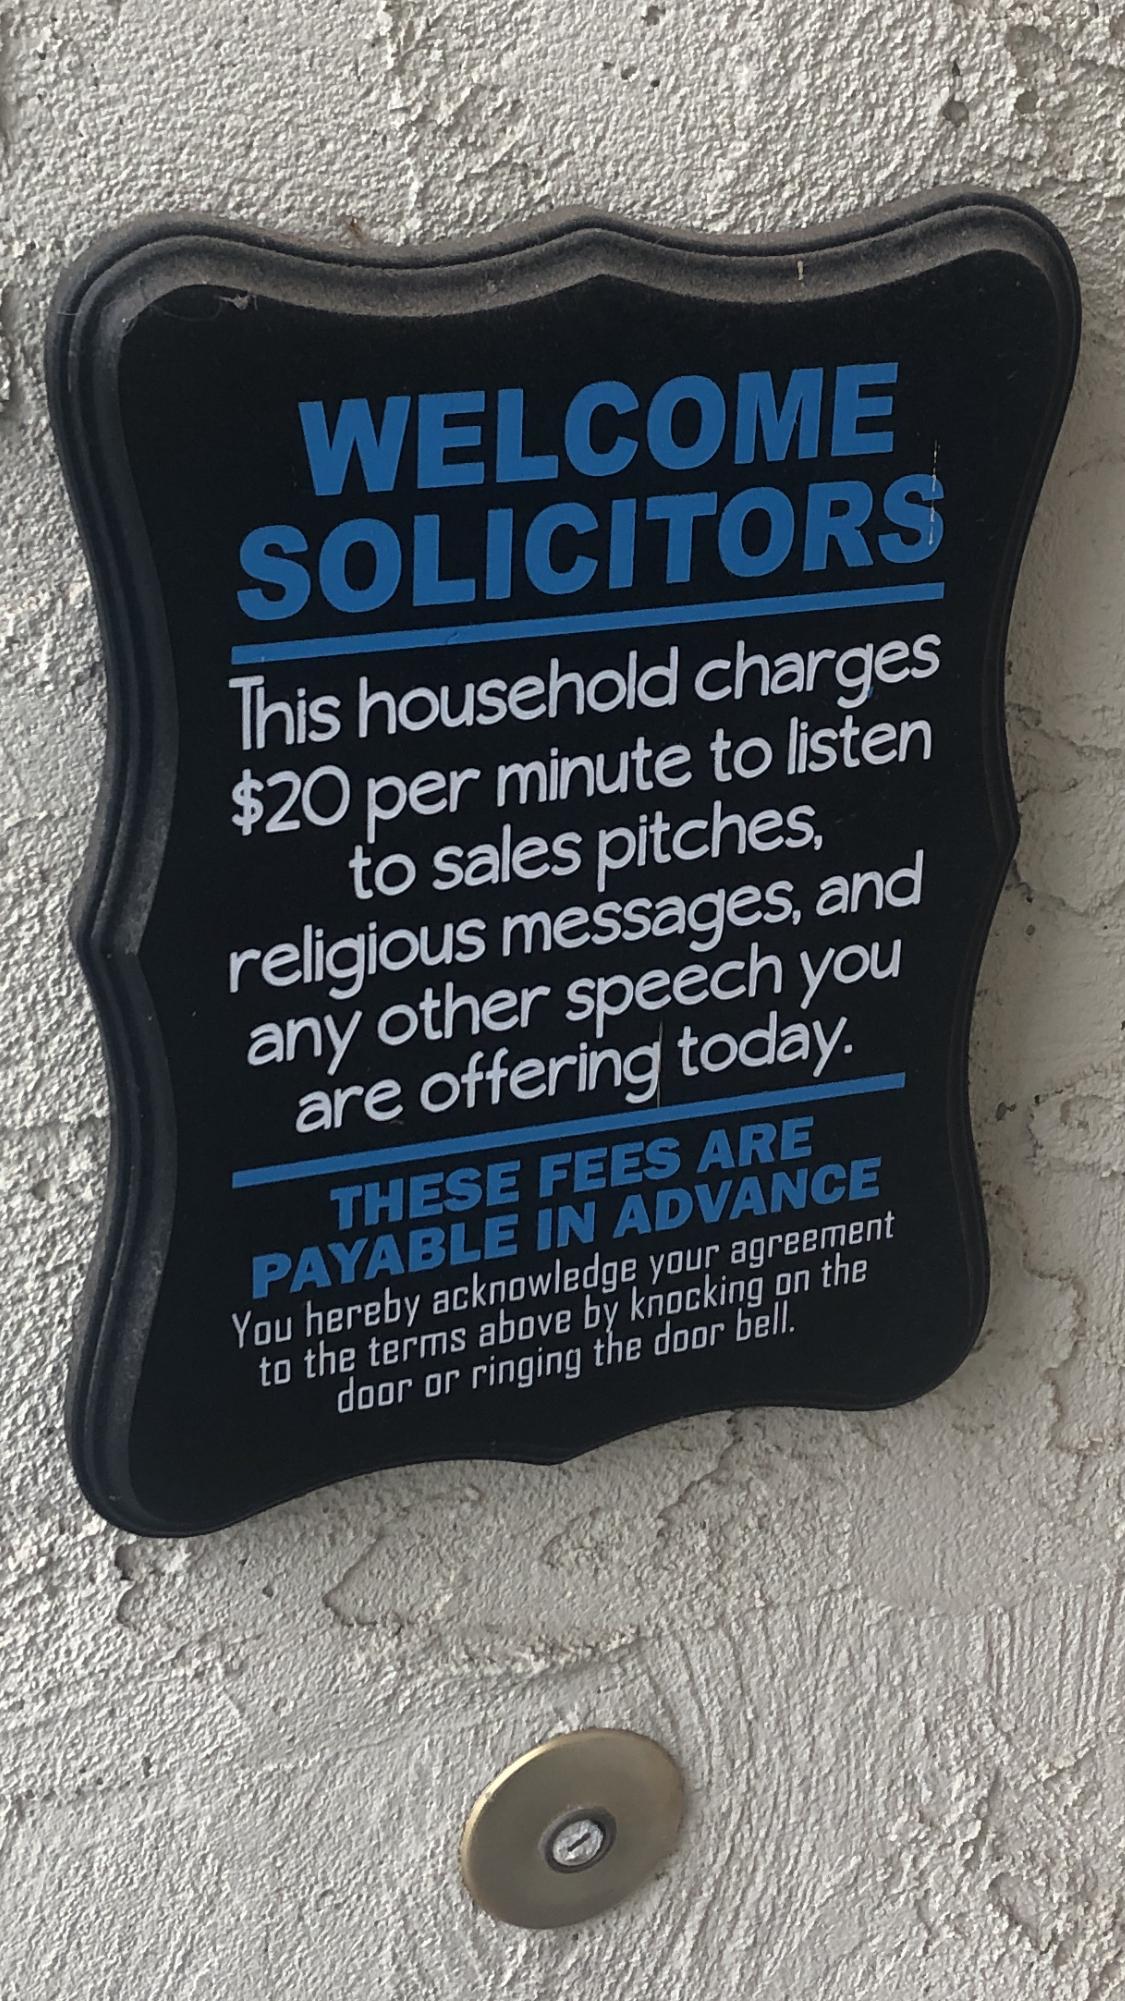 welcome solicitors meme - Welcome Solicitors This household charges $20 per minute to listen to sales pitches, religious messages, and any other speech you are offering today. These Fees Are Payable In Advance You hereby acknowledge your agreement to the 